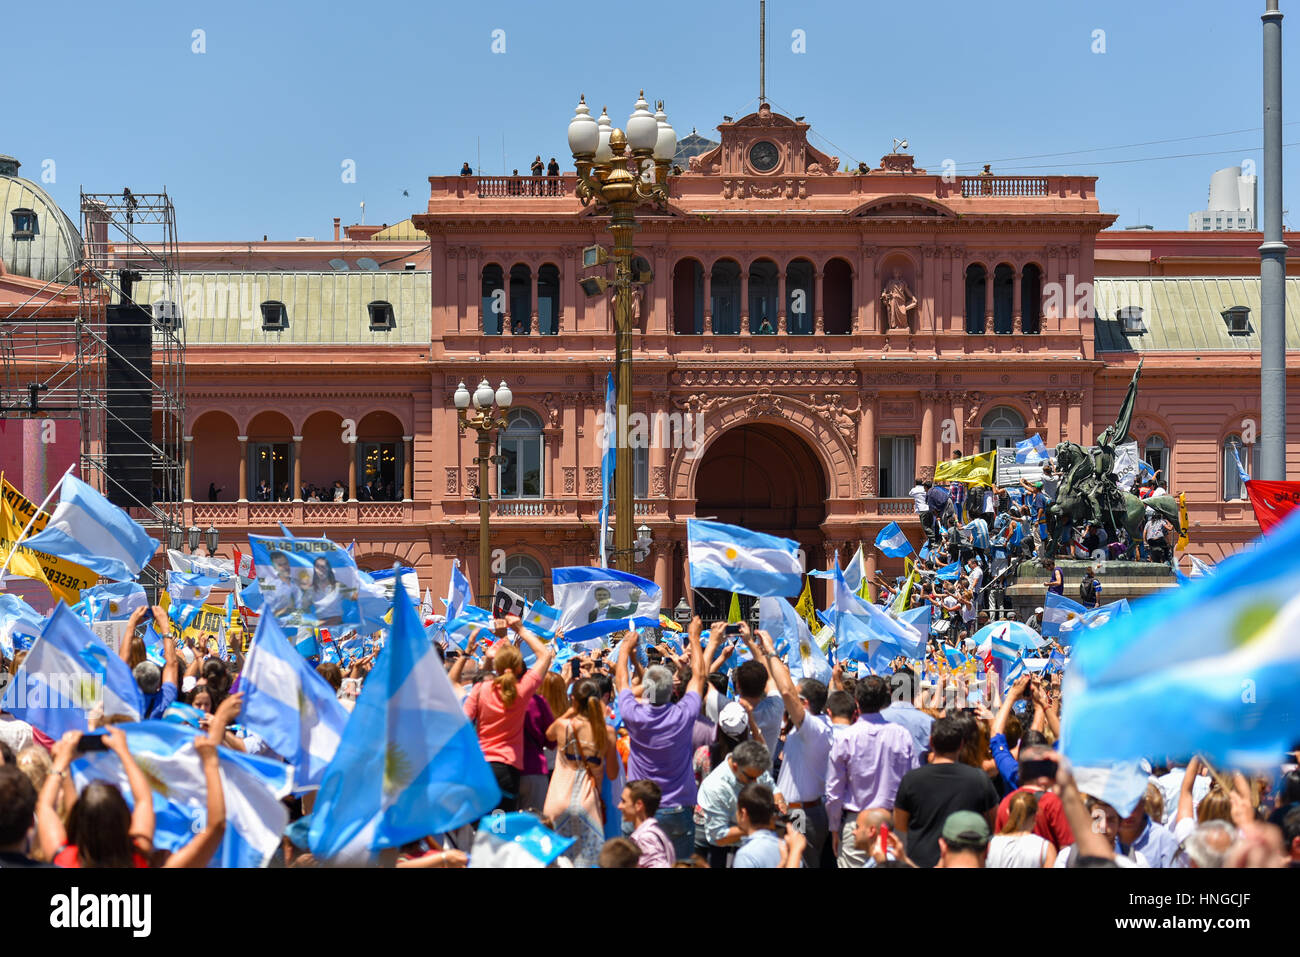 Buenos Aires, Argentina - Dec 10, 2015: Supporters of the newly elected Argentinean president wave flags on inauguration day at the Plaza de Mayo. Stock Photo